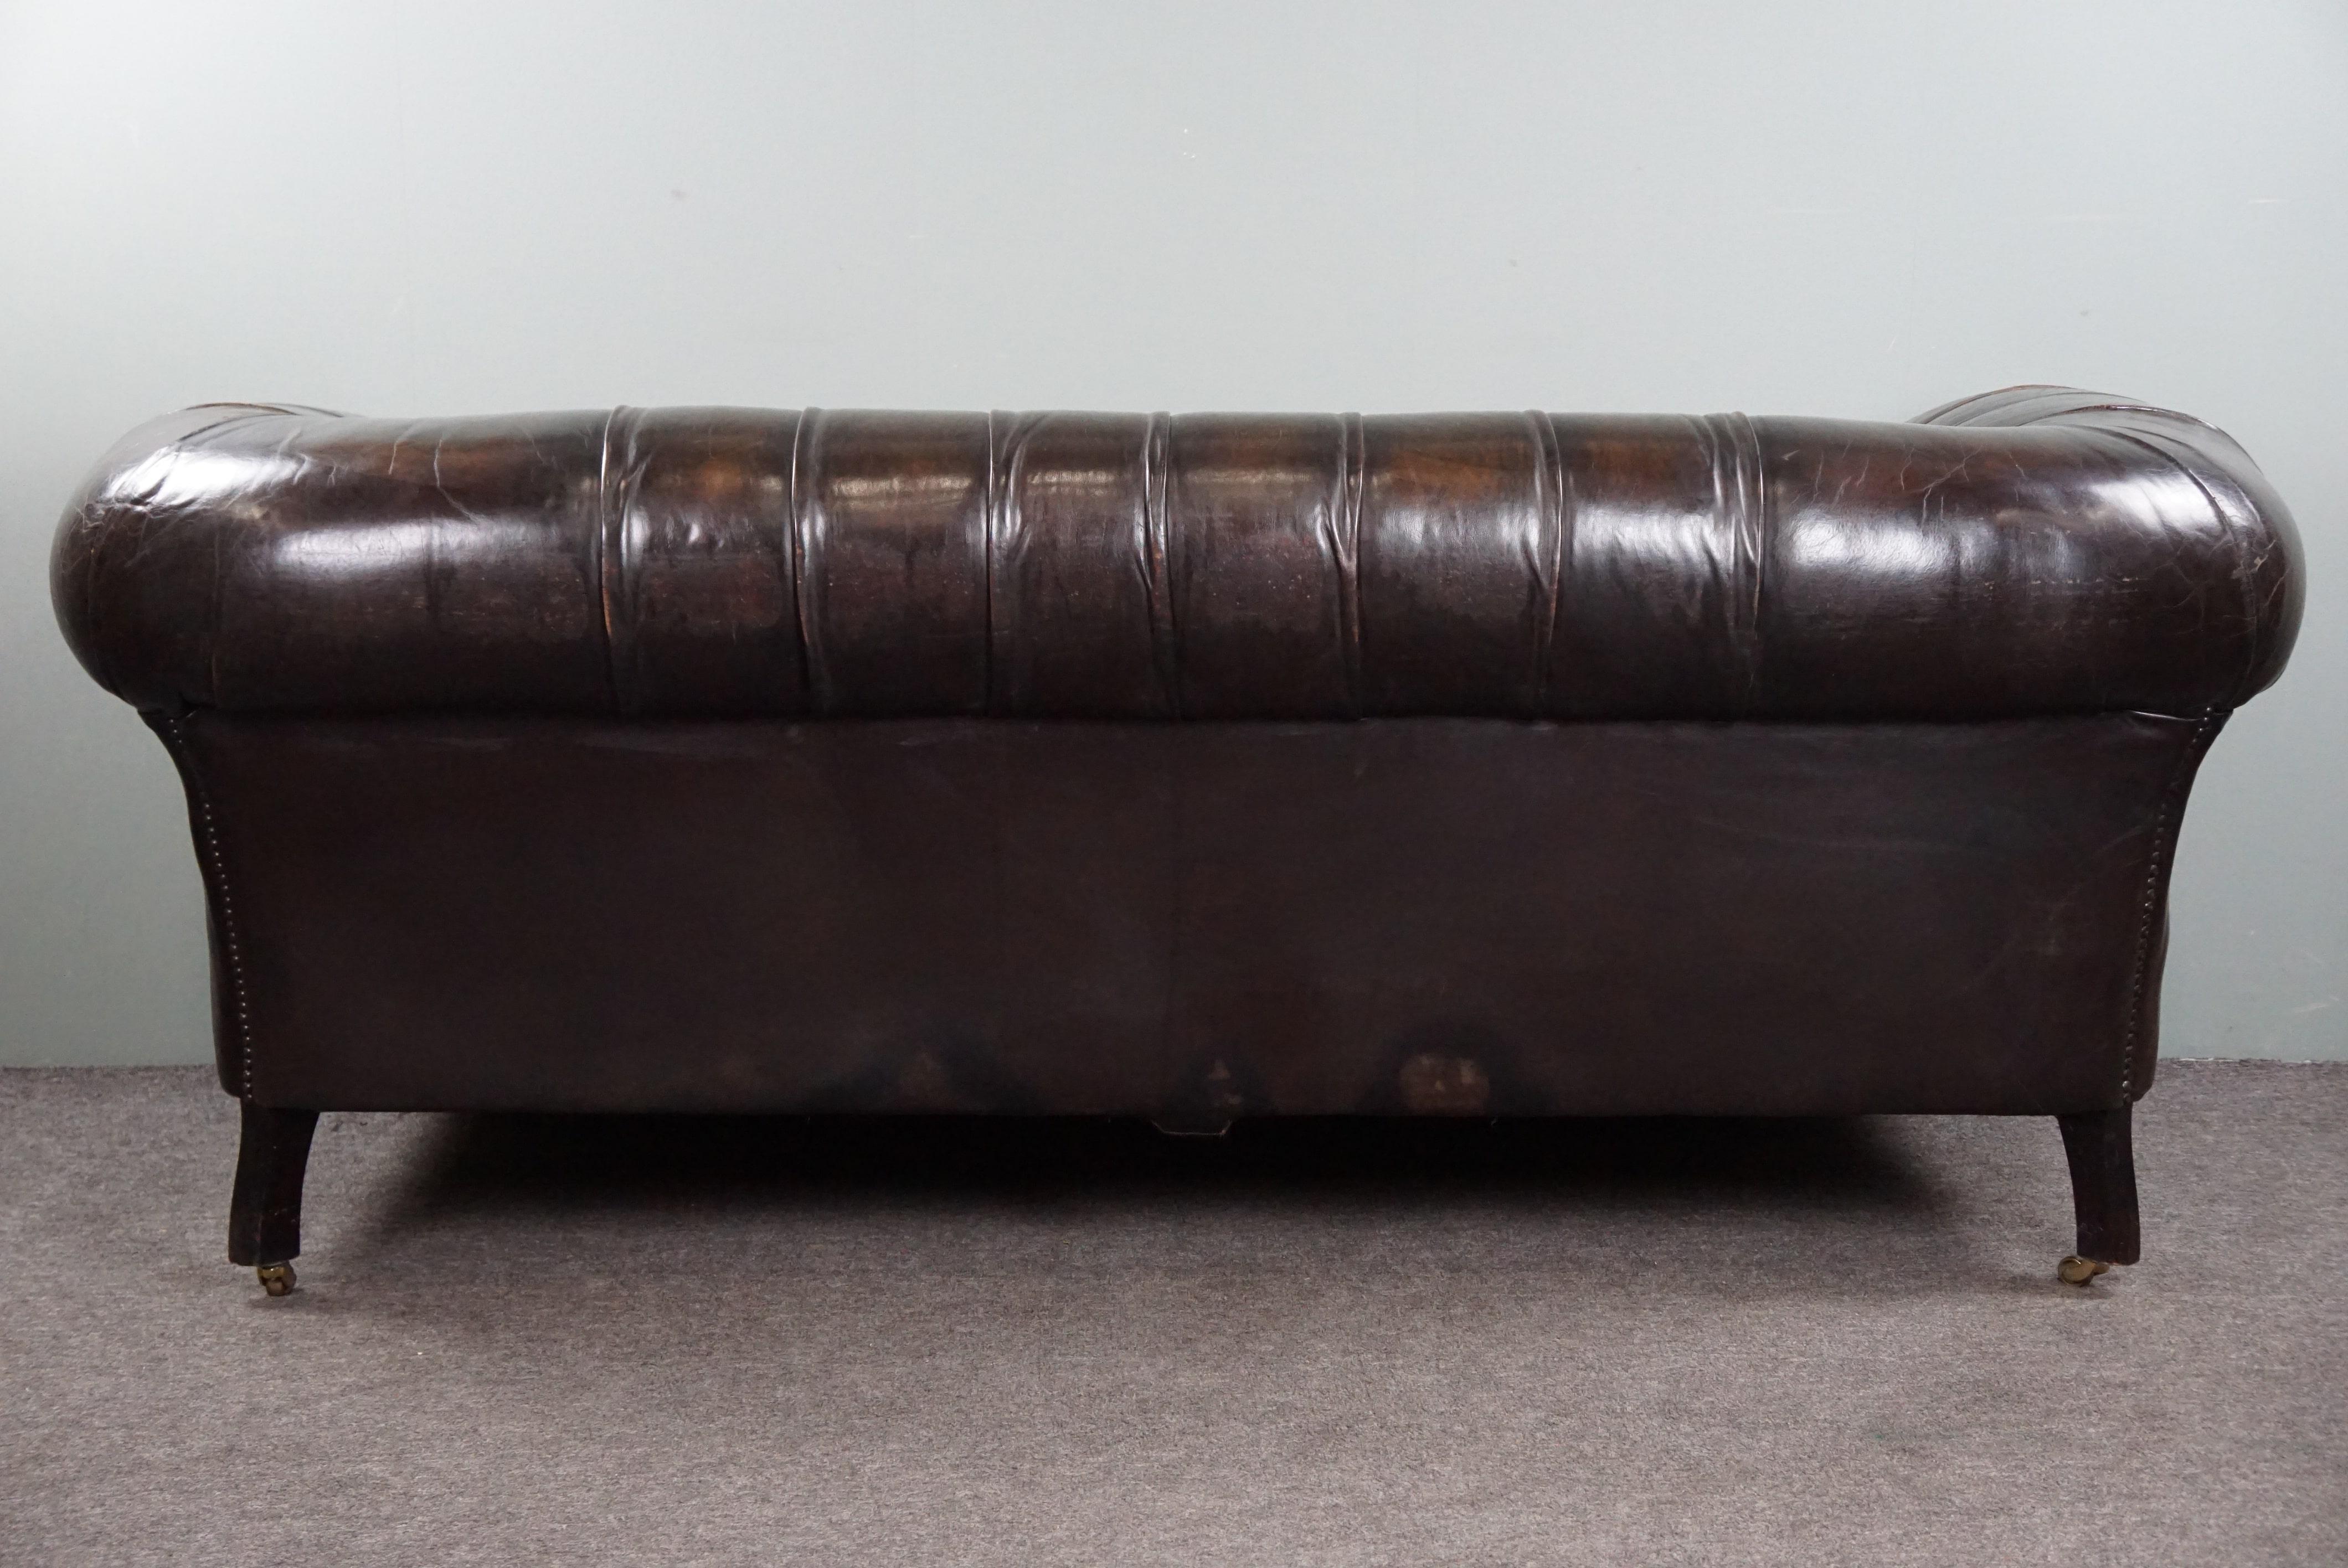 Leather Antique Chesterfield Sofa Full of Allure, 2.5 Seater For Sale